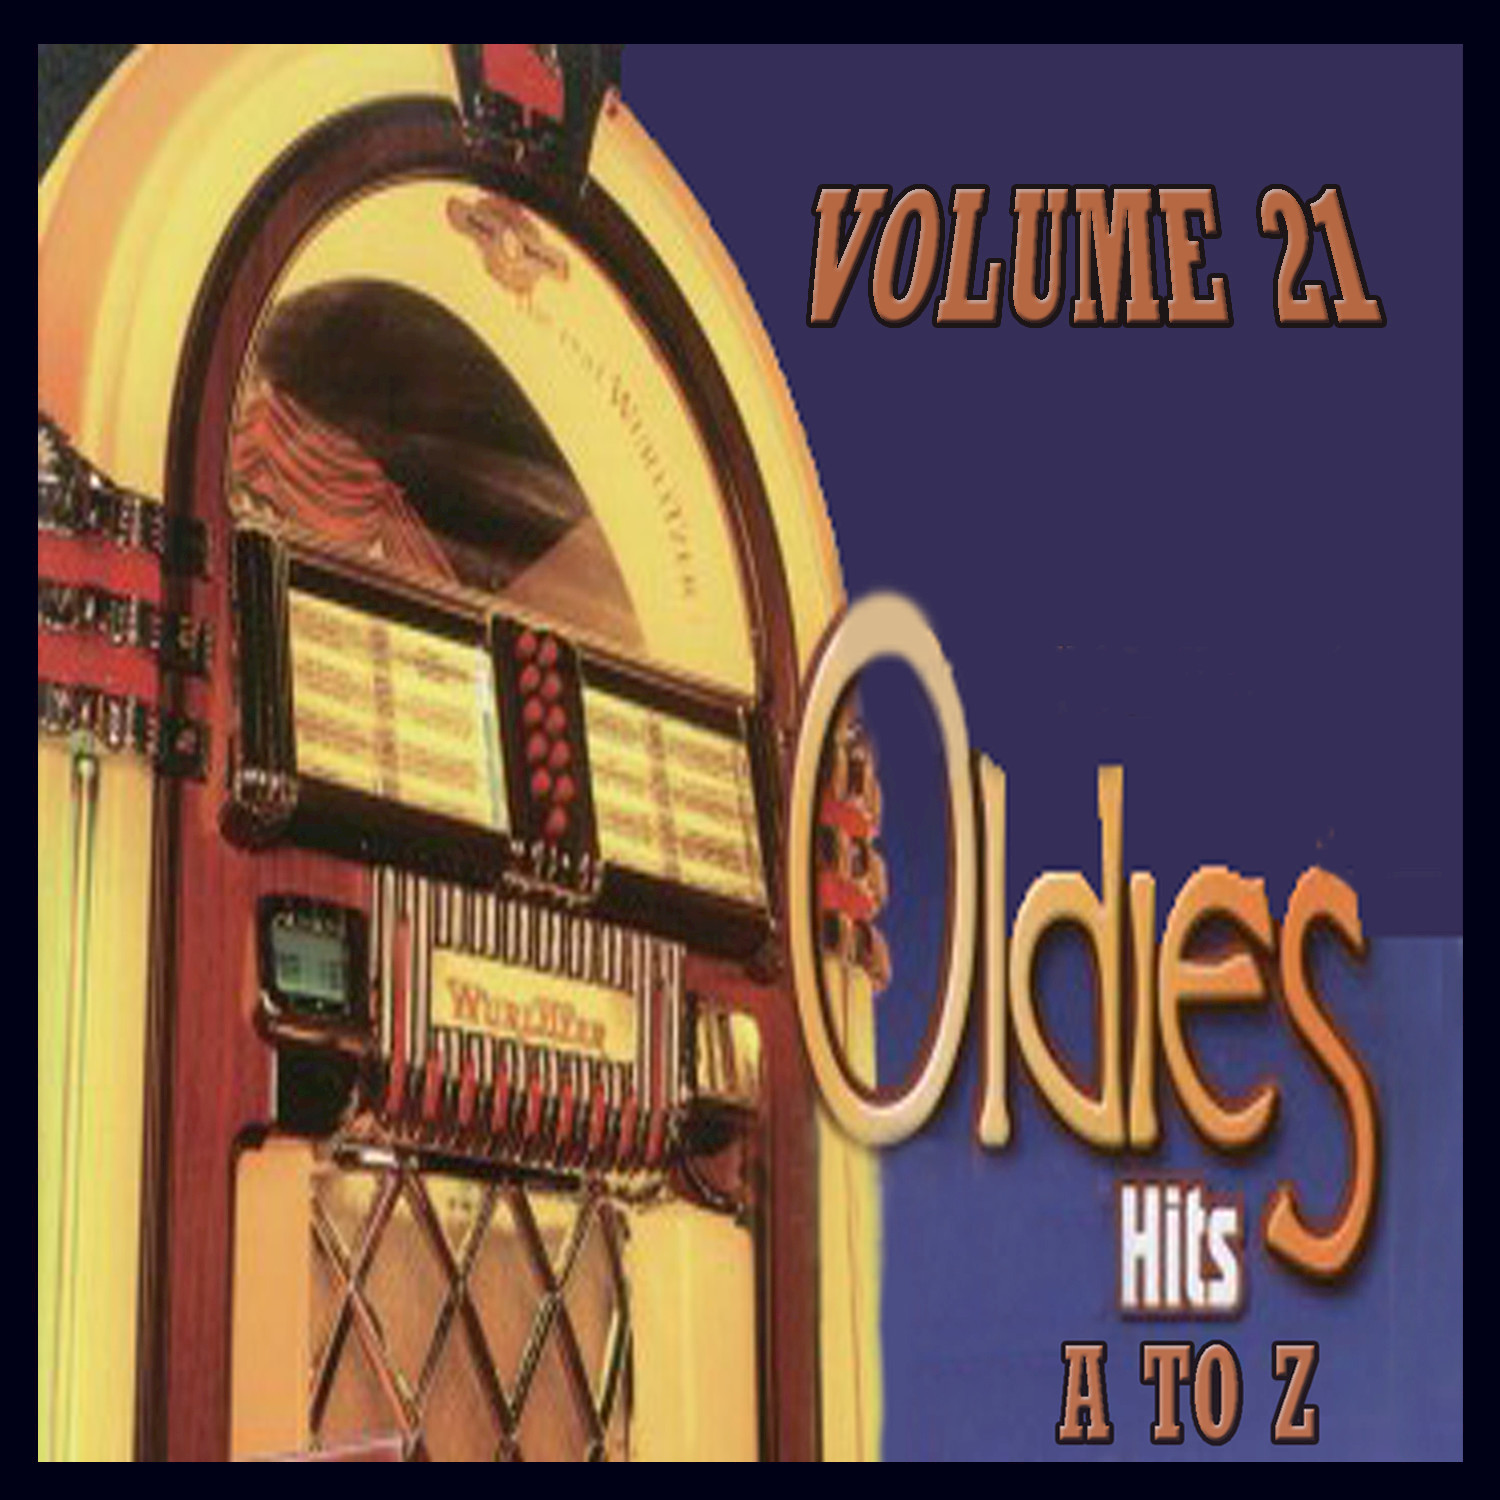 Oldies Hits A to Z, Vol. 21